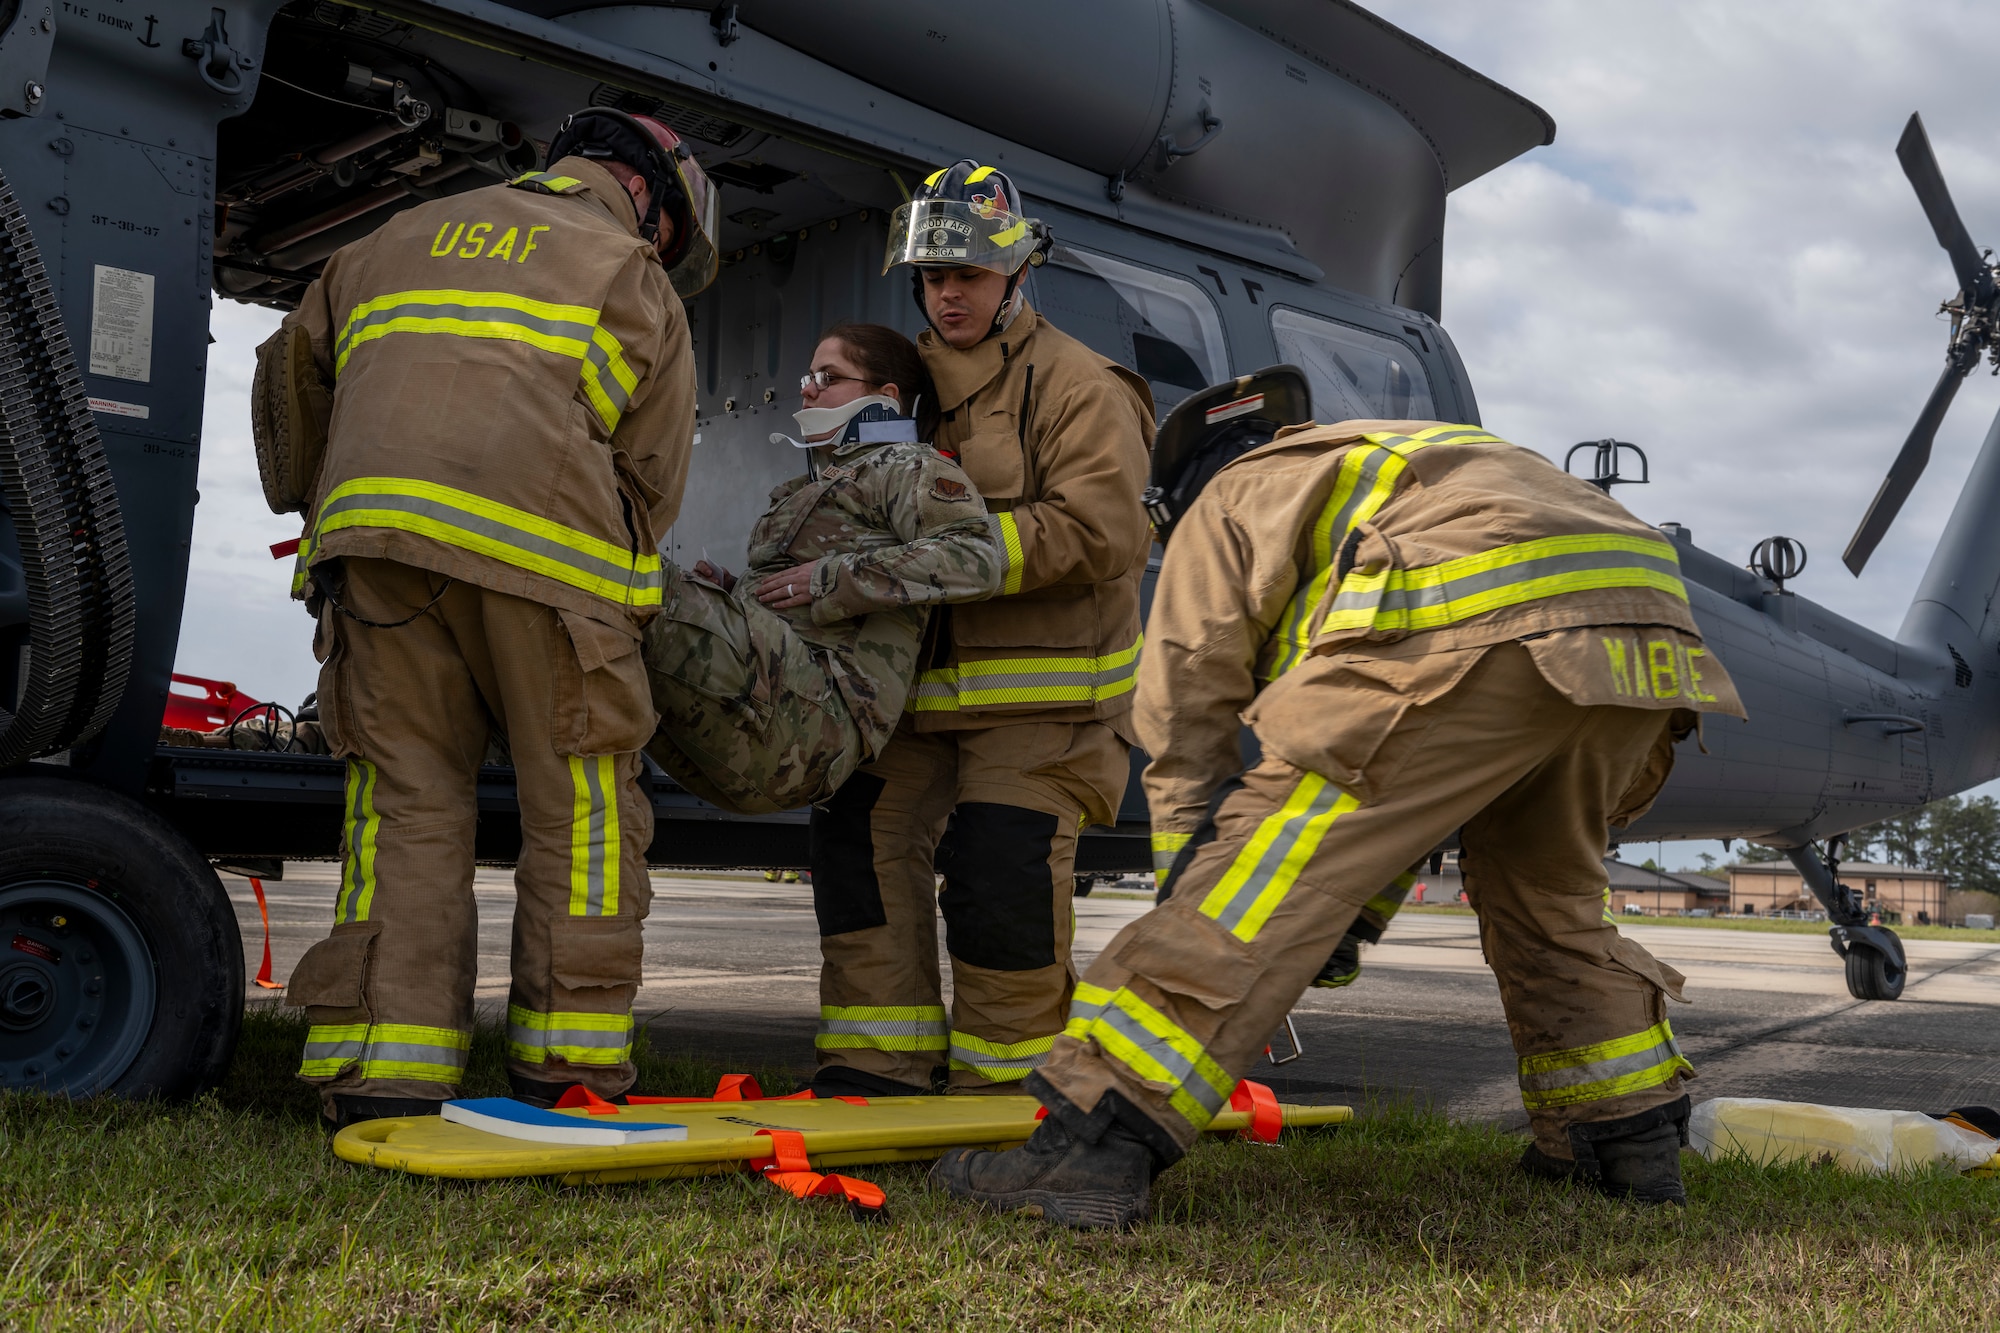 U.S. Air Force Airmen from the 23rd Civil Engineer Squadron Fire Department move a simulated patient during an aircraft accident response exercise at Moody Air Force Base, Georgia, March 26, 2024. First responders assessed the situation and provided triage to the patients, determining their required level of treatment. (U.S. Air Force photo by Senior Airman Deanna Muir)